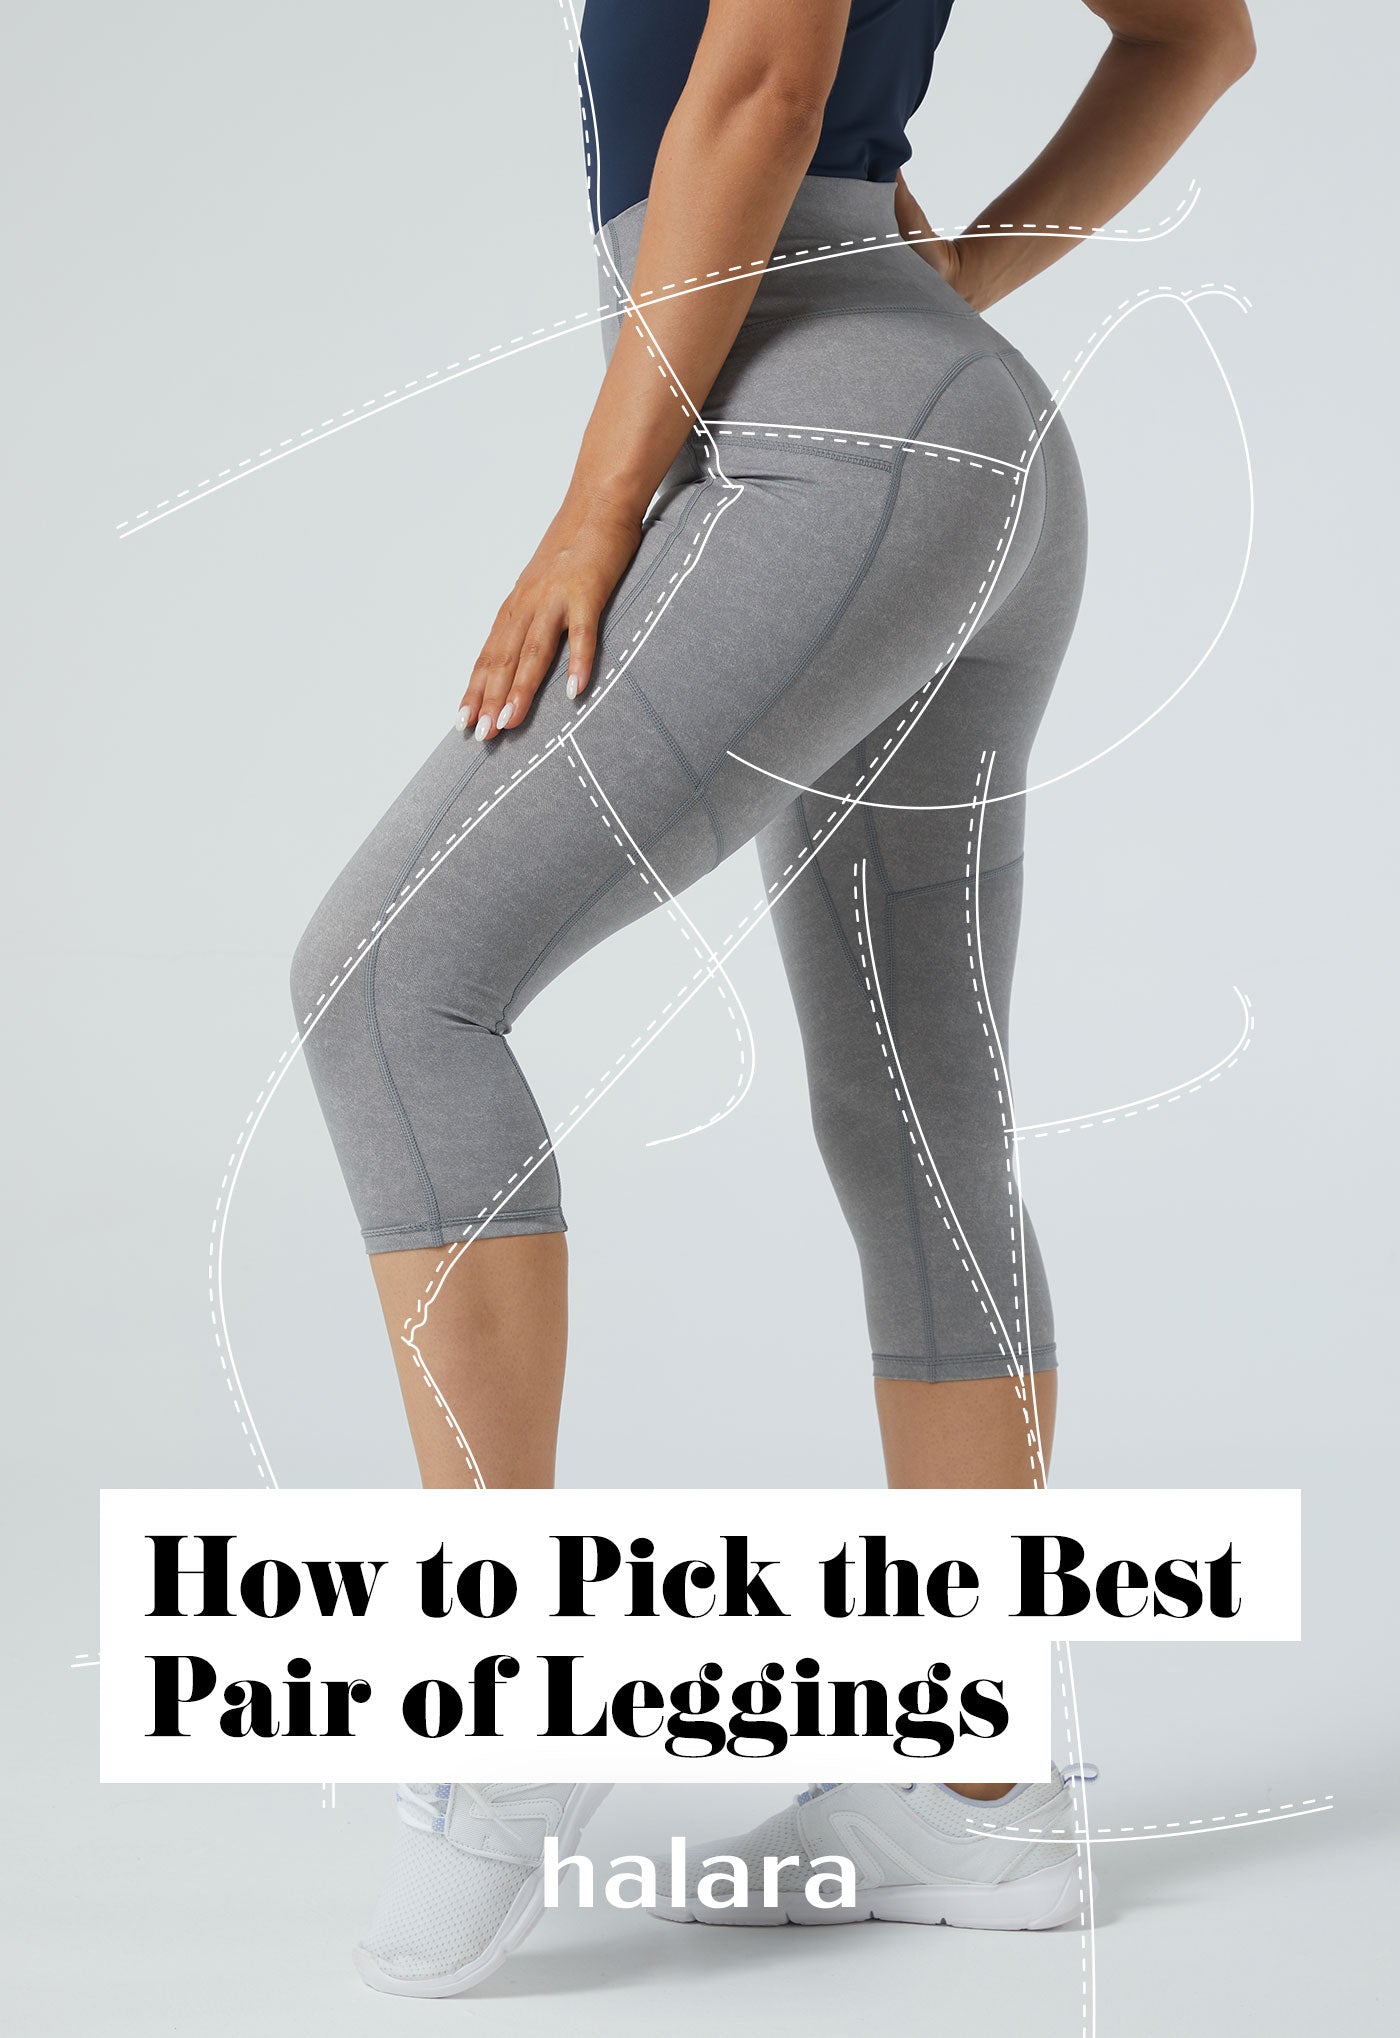 How to Pick the Best Pair of Leggings